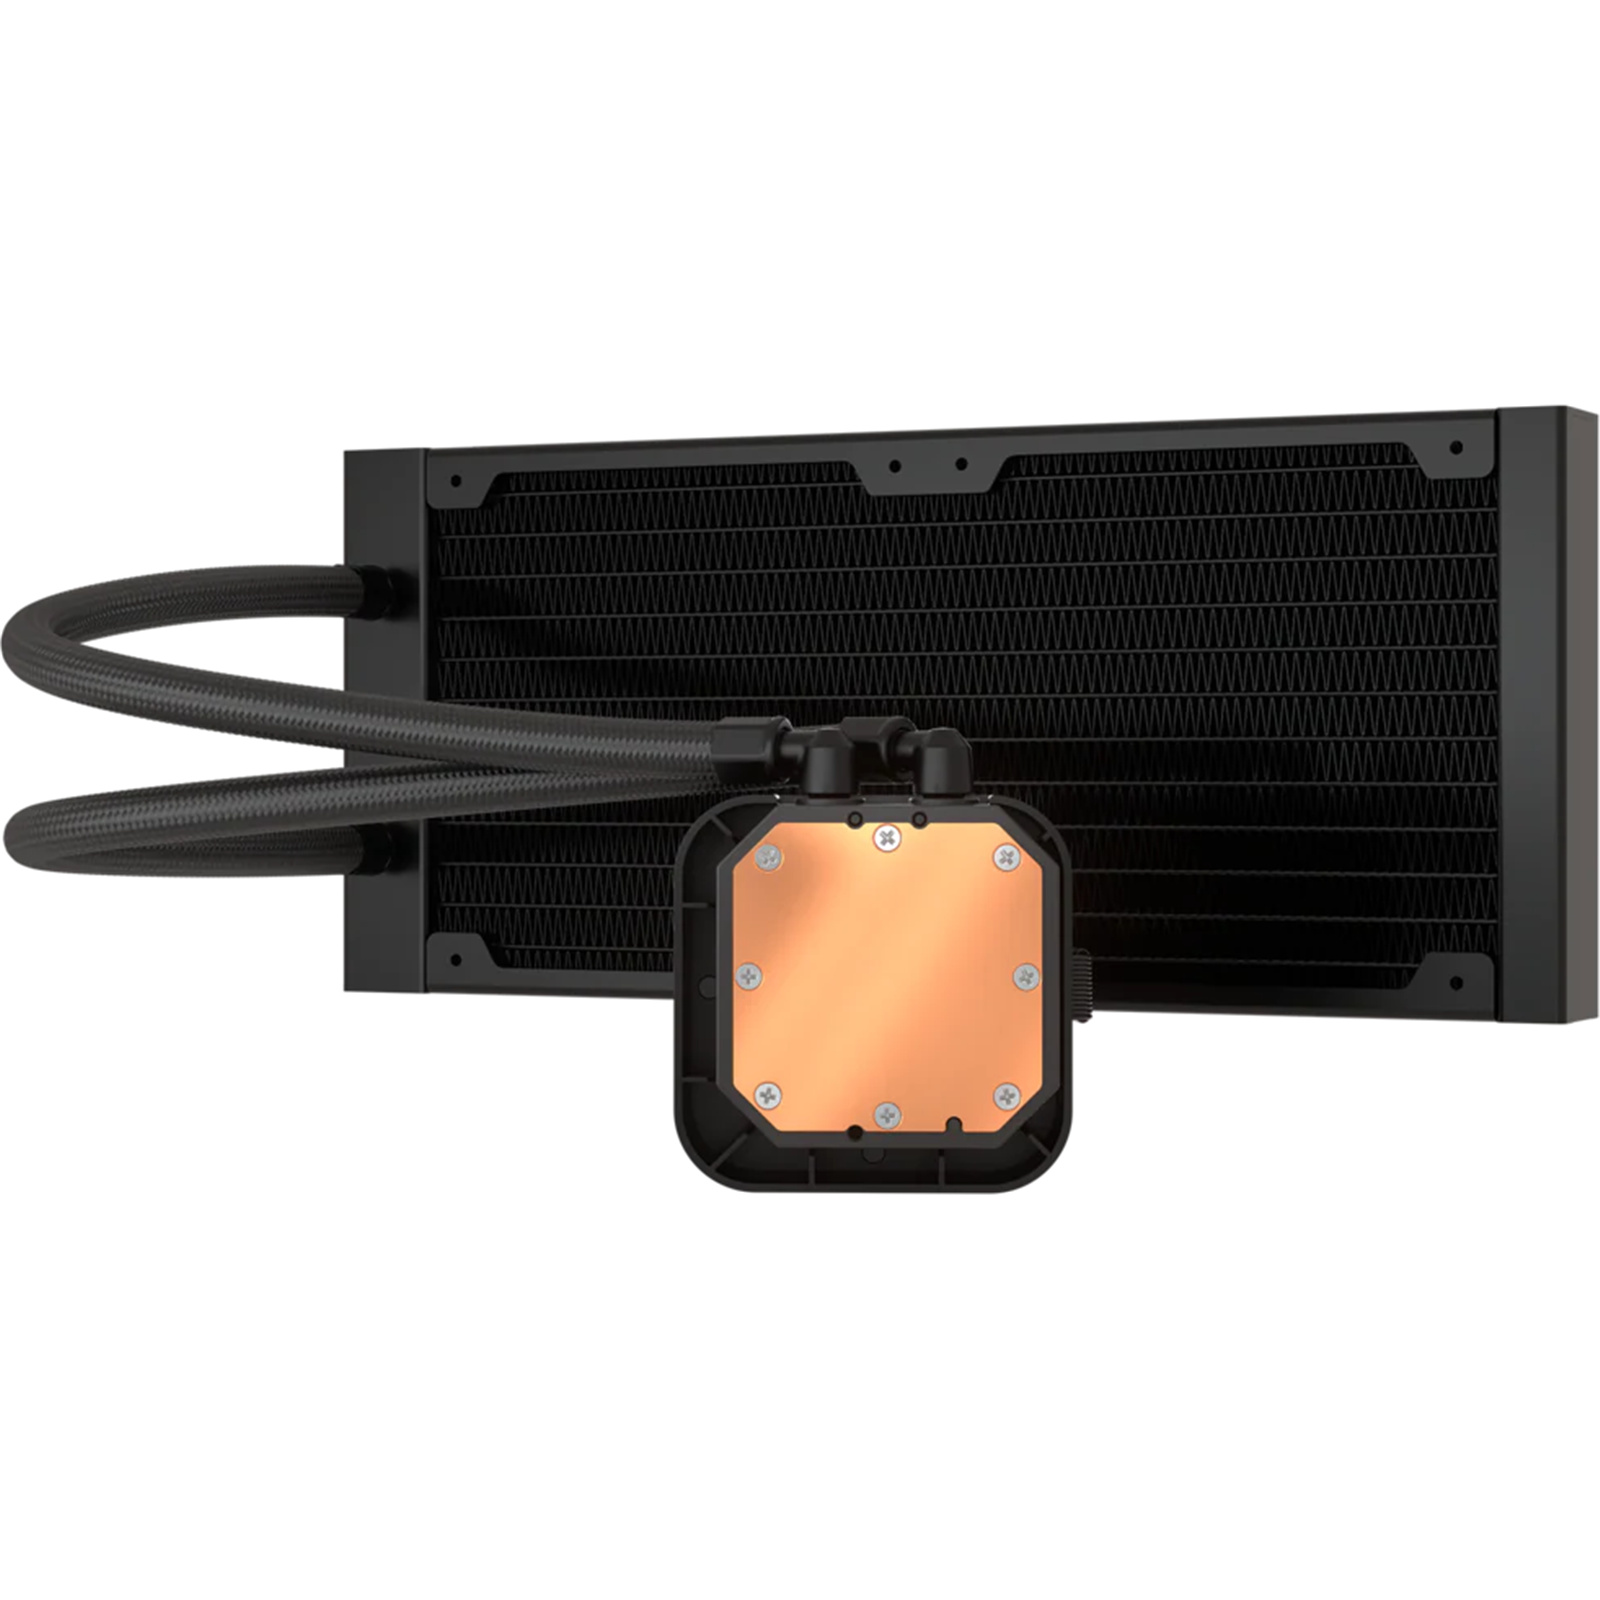 Buy the Corsair iCUE H100i ELITE LCD 240mm Water Cooling Kit 2x 120mm RGB  Fans... ( CW-9060061-WW ) online - PBTech.com